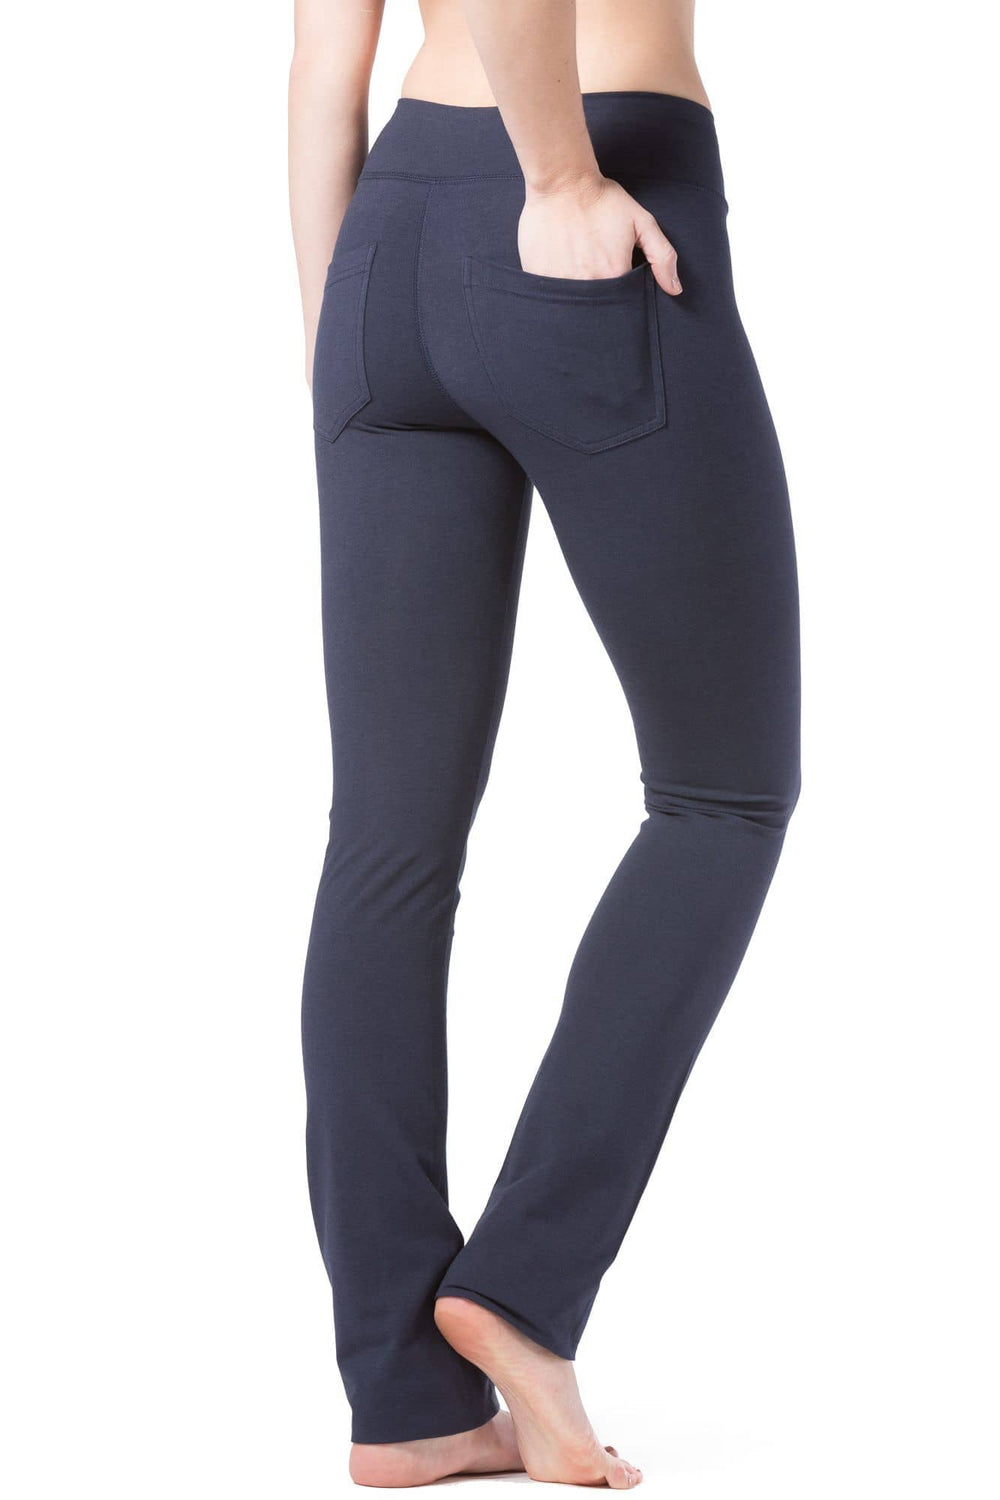 Straight Leg Yoga Pants with Pockets | Athleisure | Fishers Finery